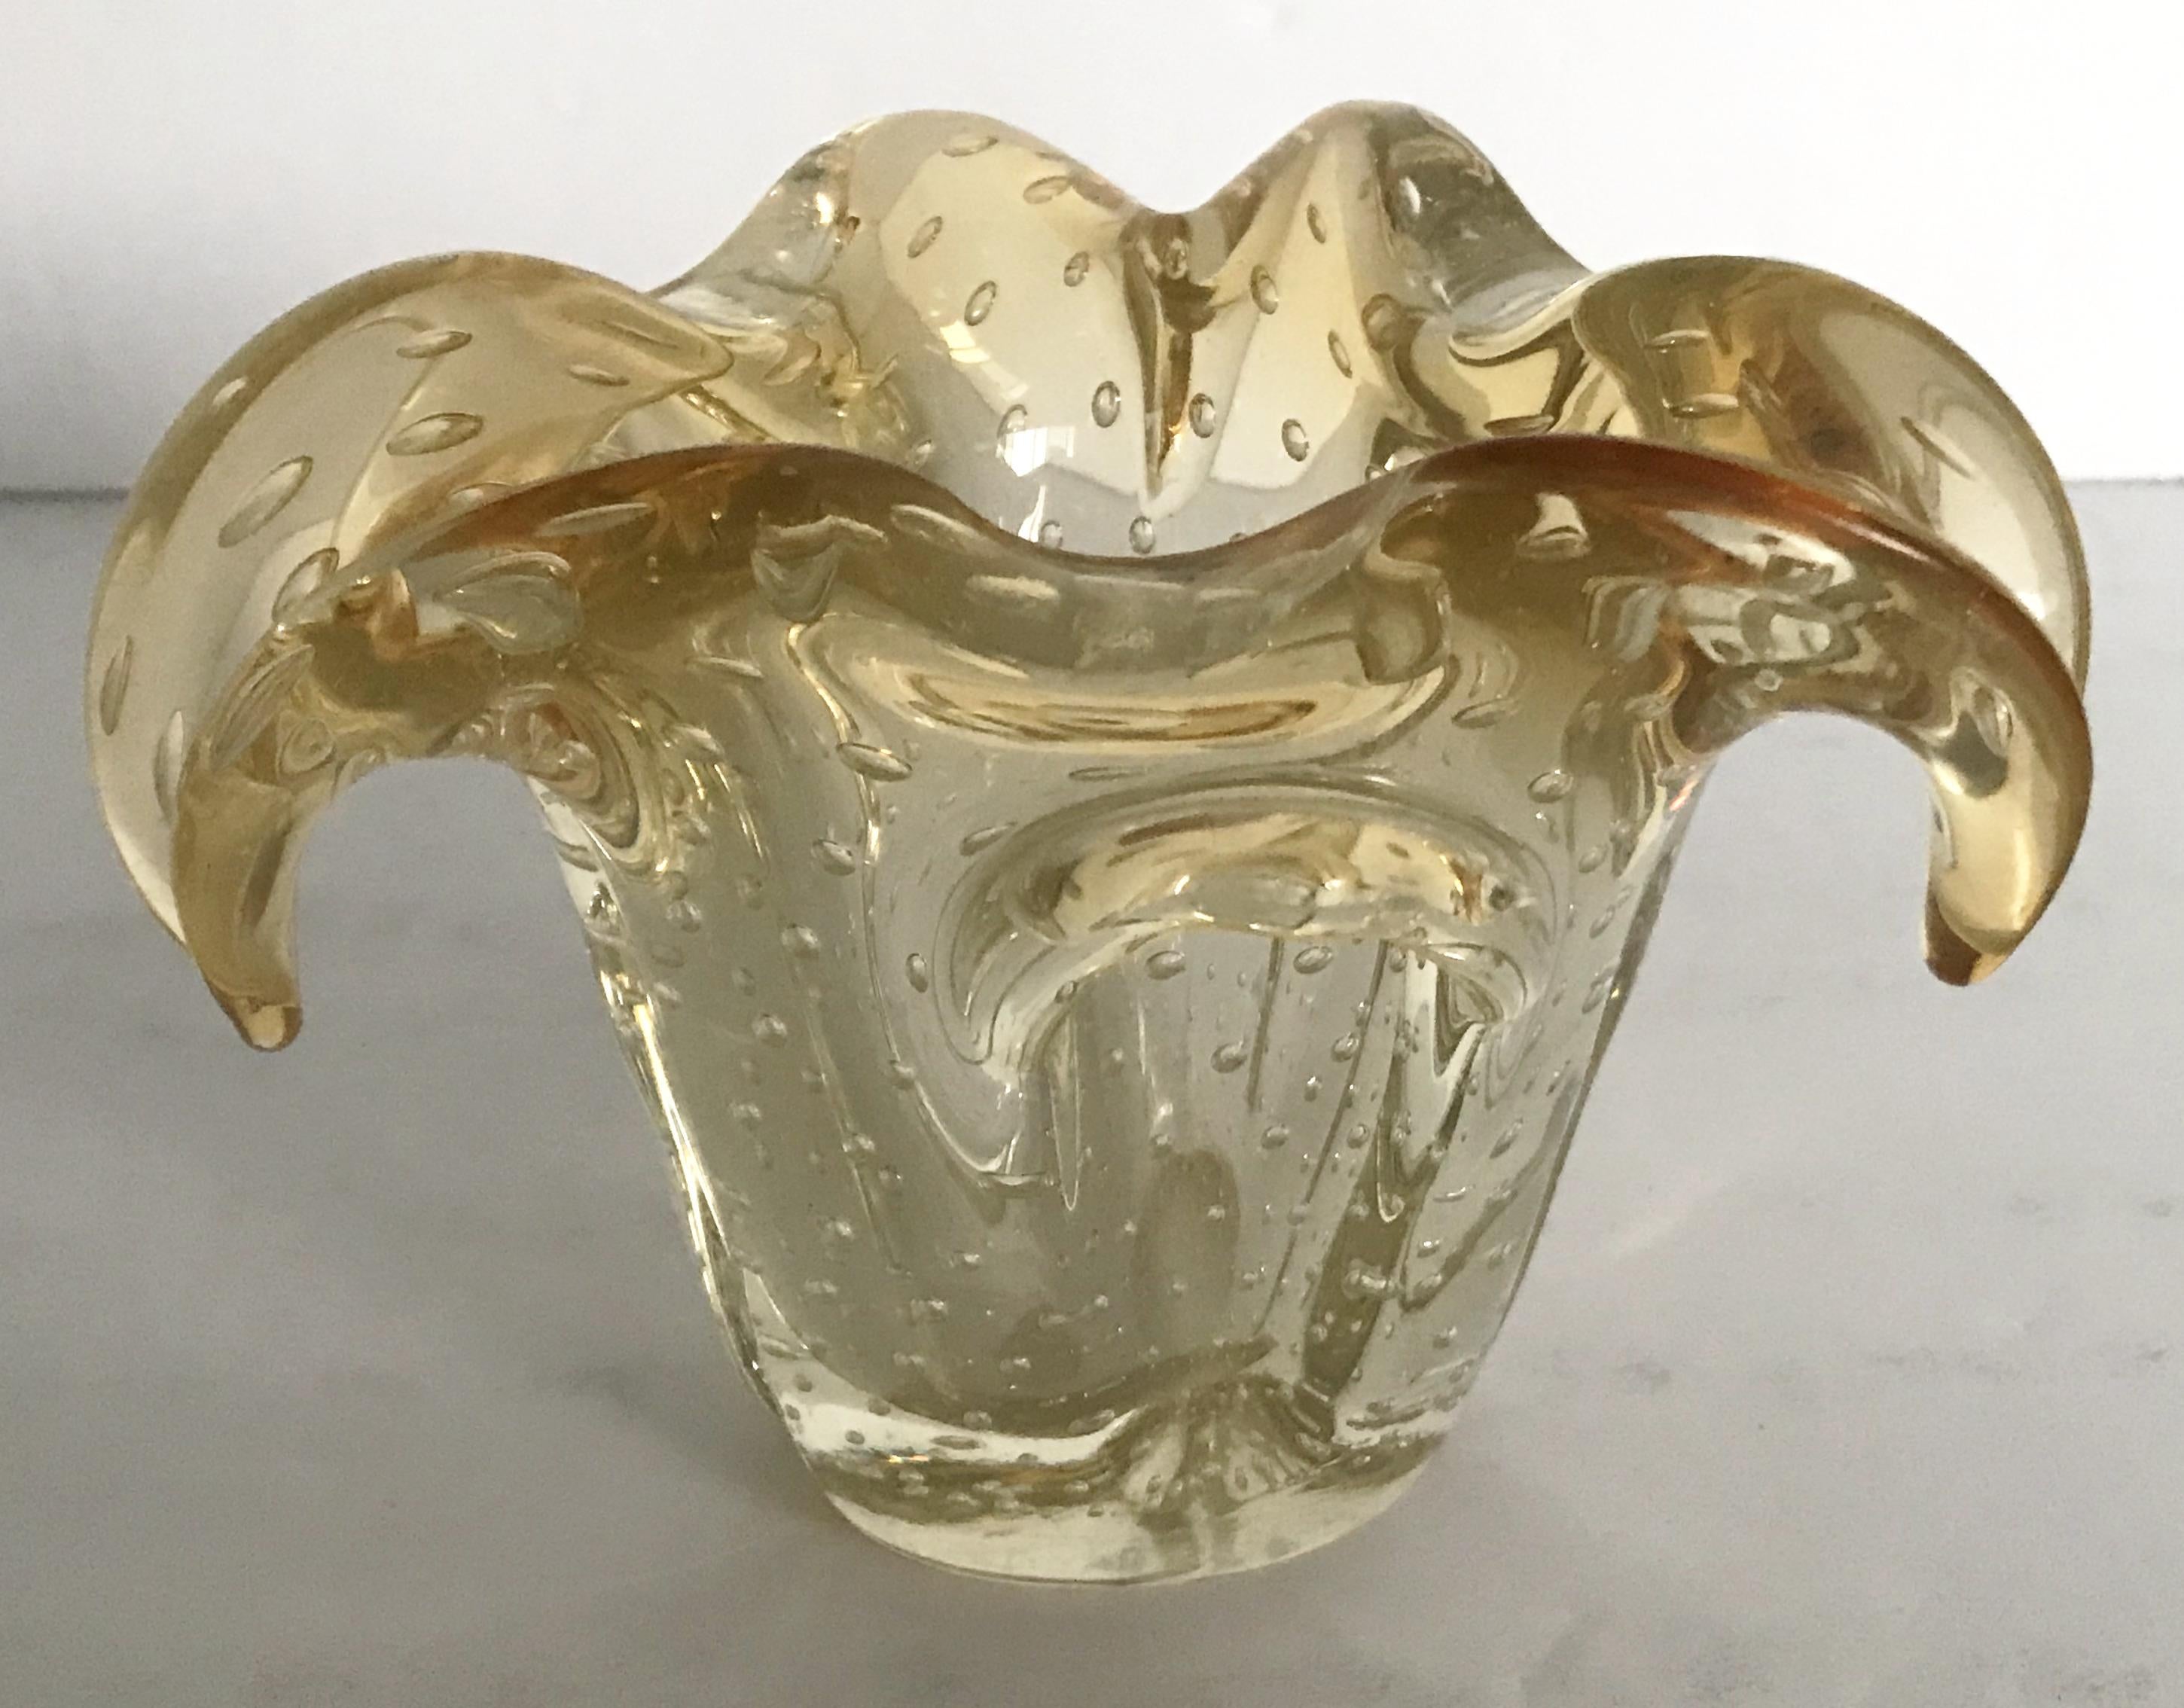 Vintage Italian light amber Murano glass bowl carefully hand blown with small bubbles inside the glass using pulegoso technique / Made in Italy, circa 1960s
Measures: diameter 6 inches, height 5 inches
1 in stock in Palm Springs ON 50% OFF SALE for